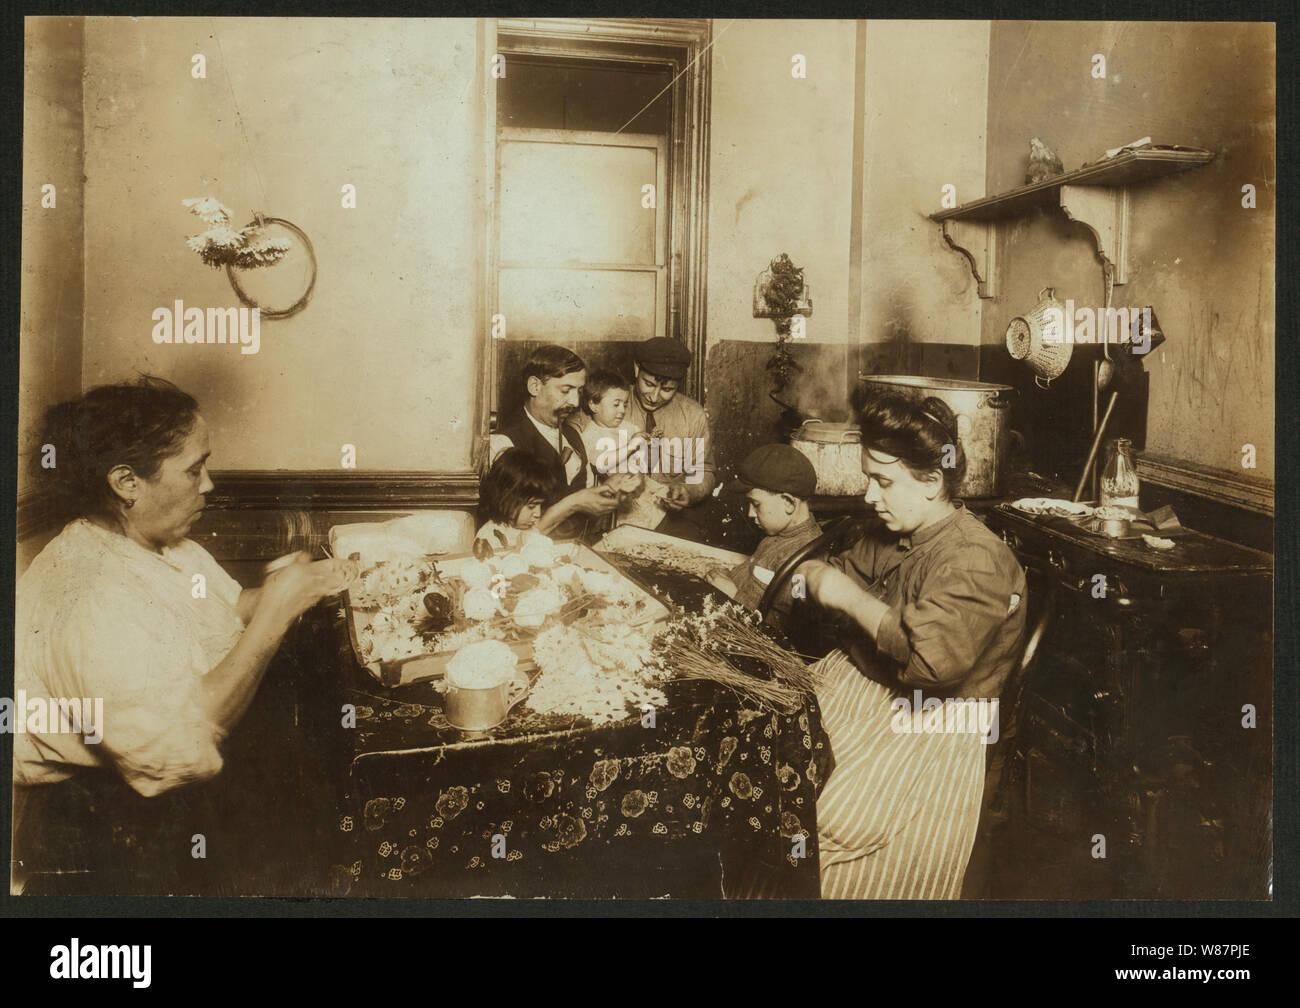 4 P.M. John Sachatello, a barber with a steady job helping family make flowers, 302 Mott St. Making bluettes at $2.00 a gross. Makes $12.00 to $13.00 a week when all work. Mary 5 yrs. old. Tommy 7 yrs. old. Stock Photo